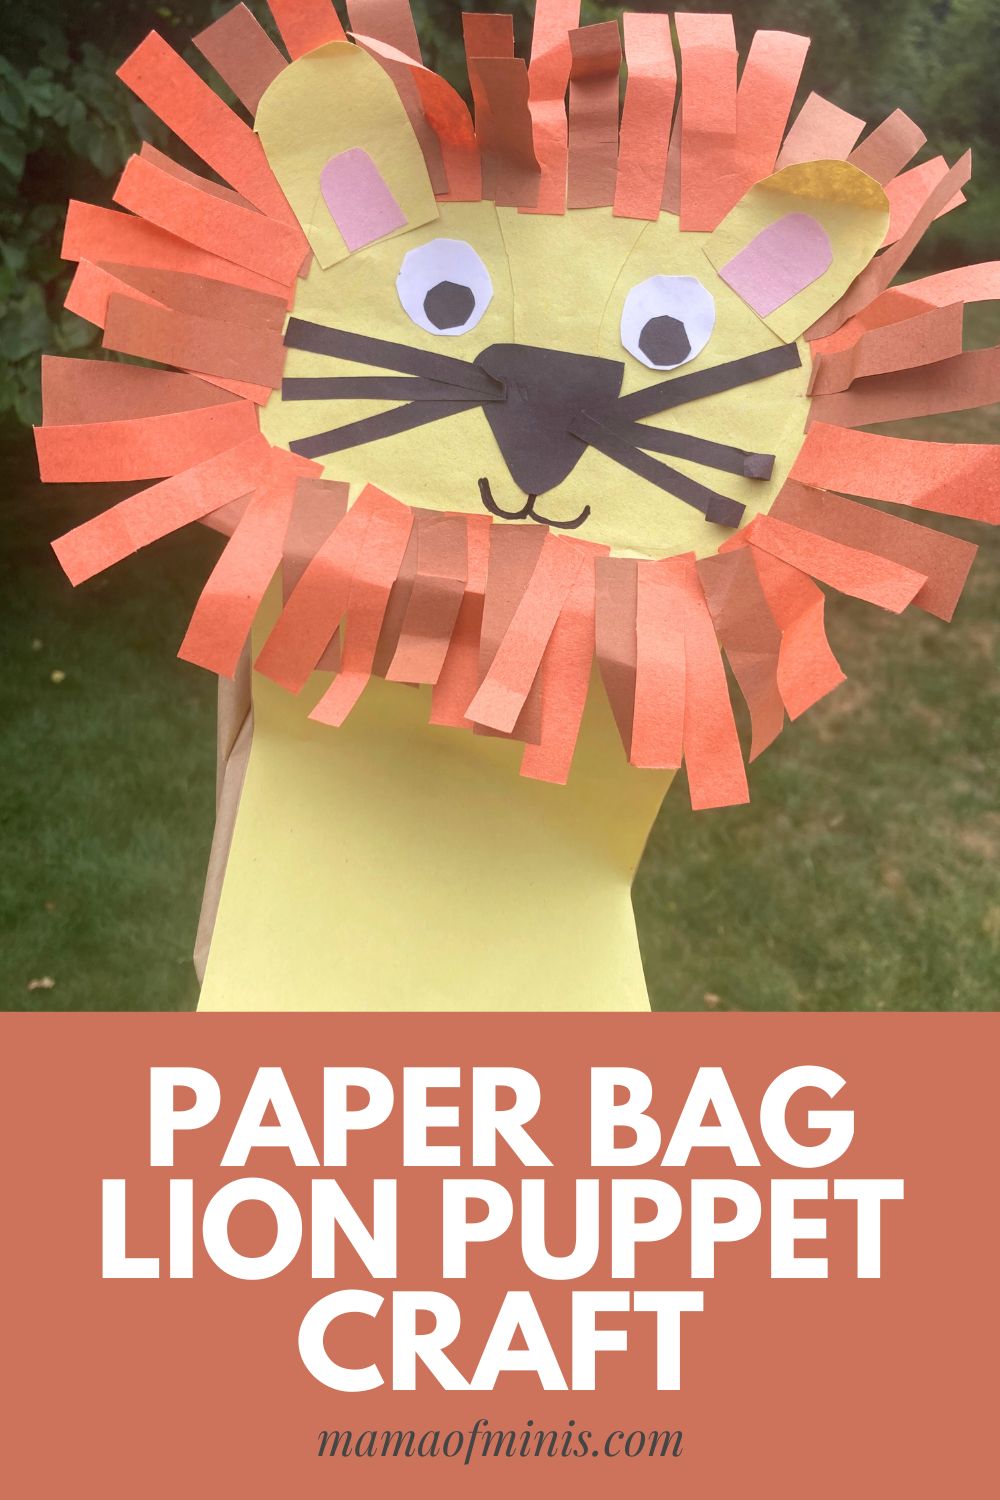 Paper Bag Lion Puppet Craft for Kids - Mama of Minis